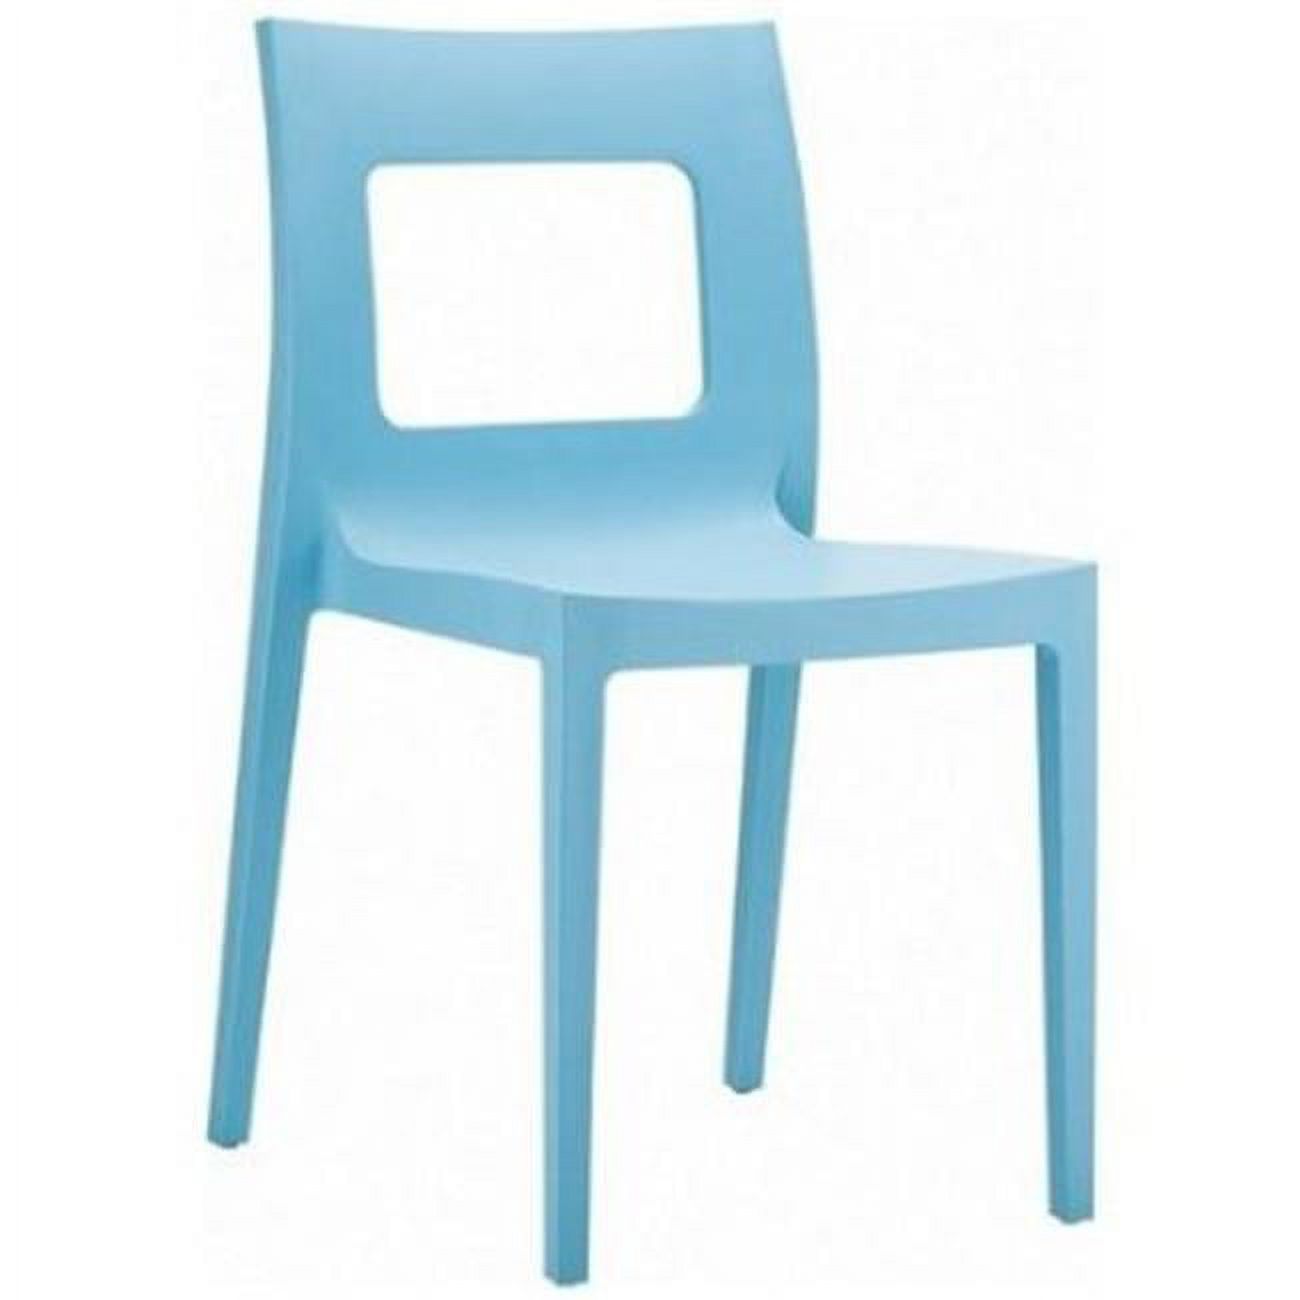 Siesta Lucca Set of 2 Dining Chair Blue ISP026-LBL - image 1 of 2